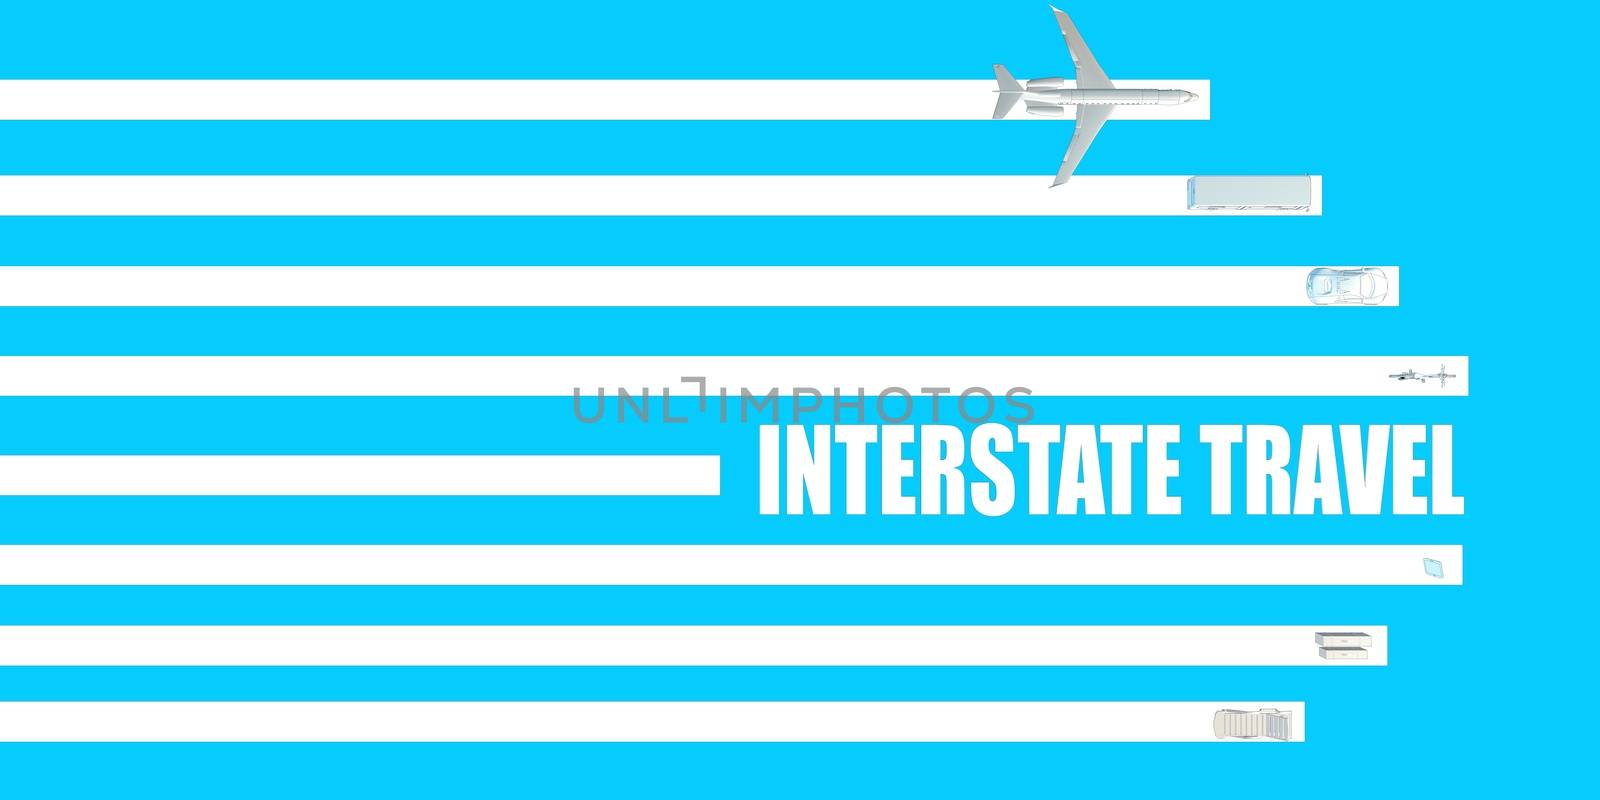 Interstate Travel for Information Update as a Traveler Concept